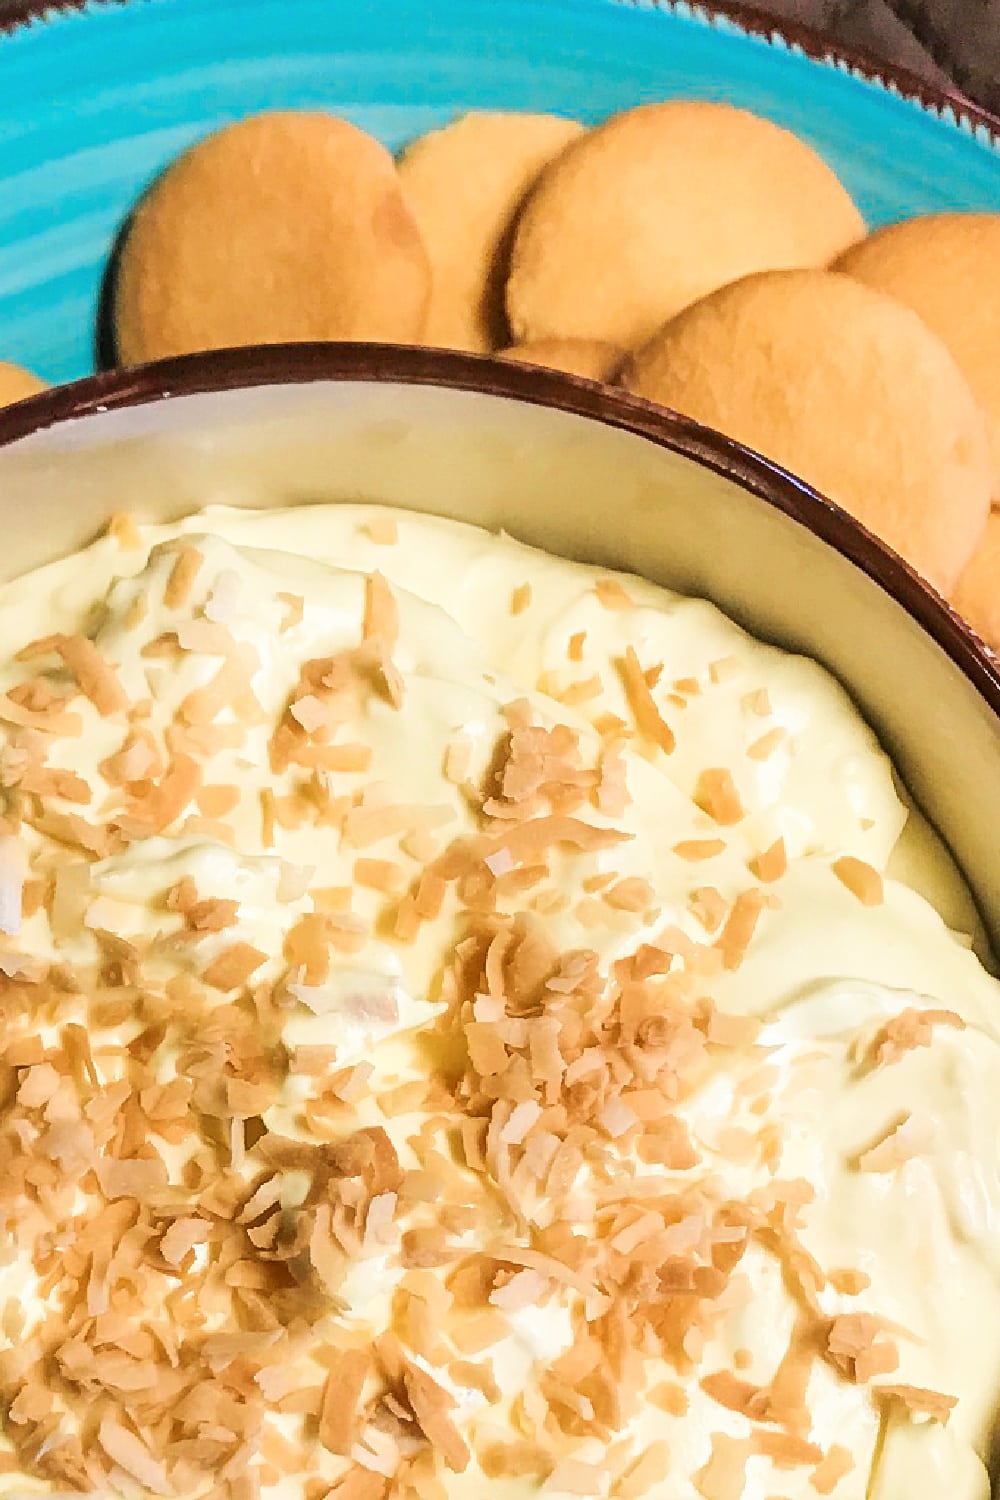 A serving bowl of coconut cream pie dip with cookies for dipping.